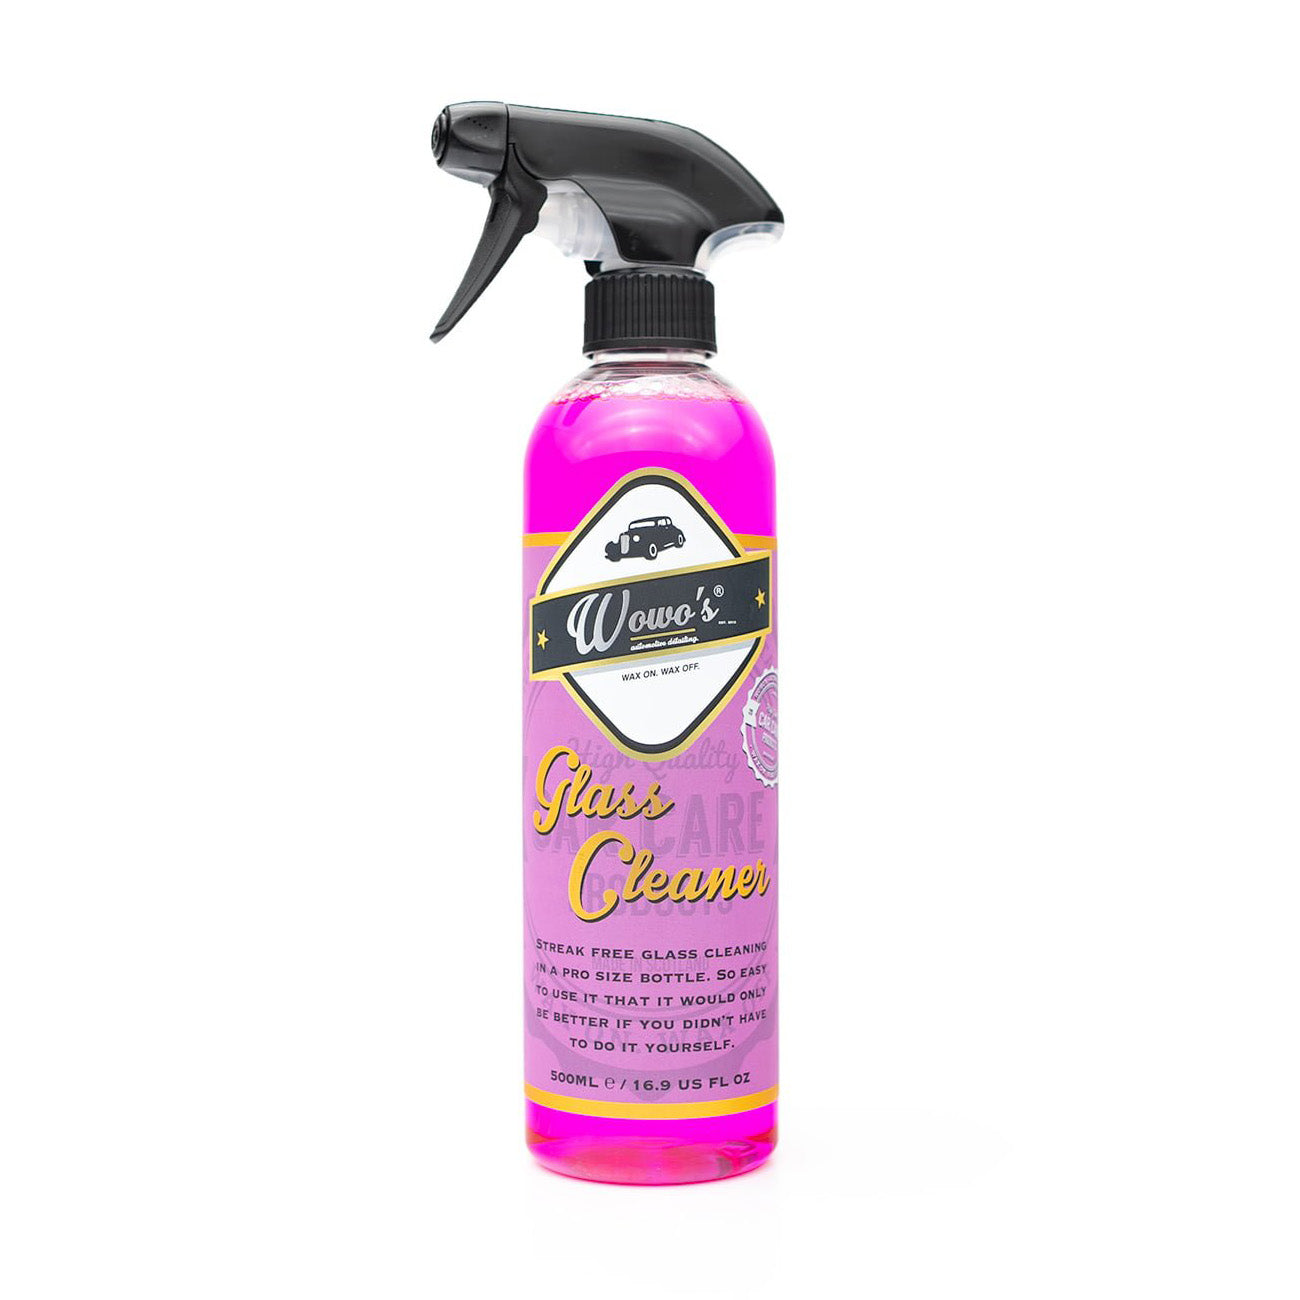 Wowo’s Glass Cleaner